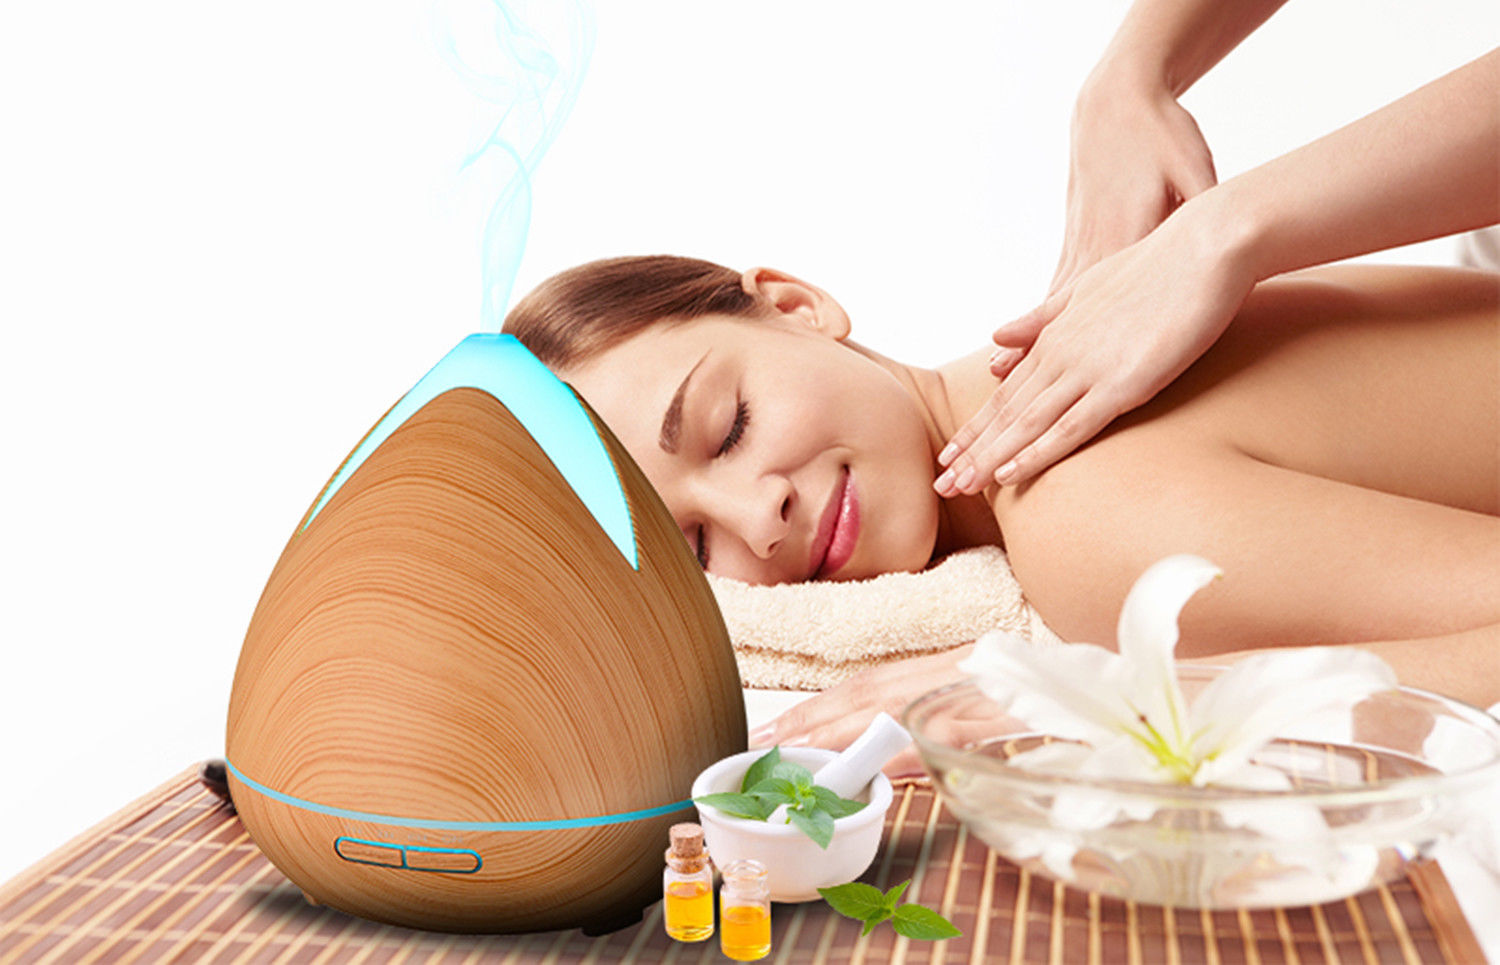 Essential Oils Ultrasonic Aromatherapy Diffuser Air Humidifier Purify 400ML Light Wood - AULASH